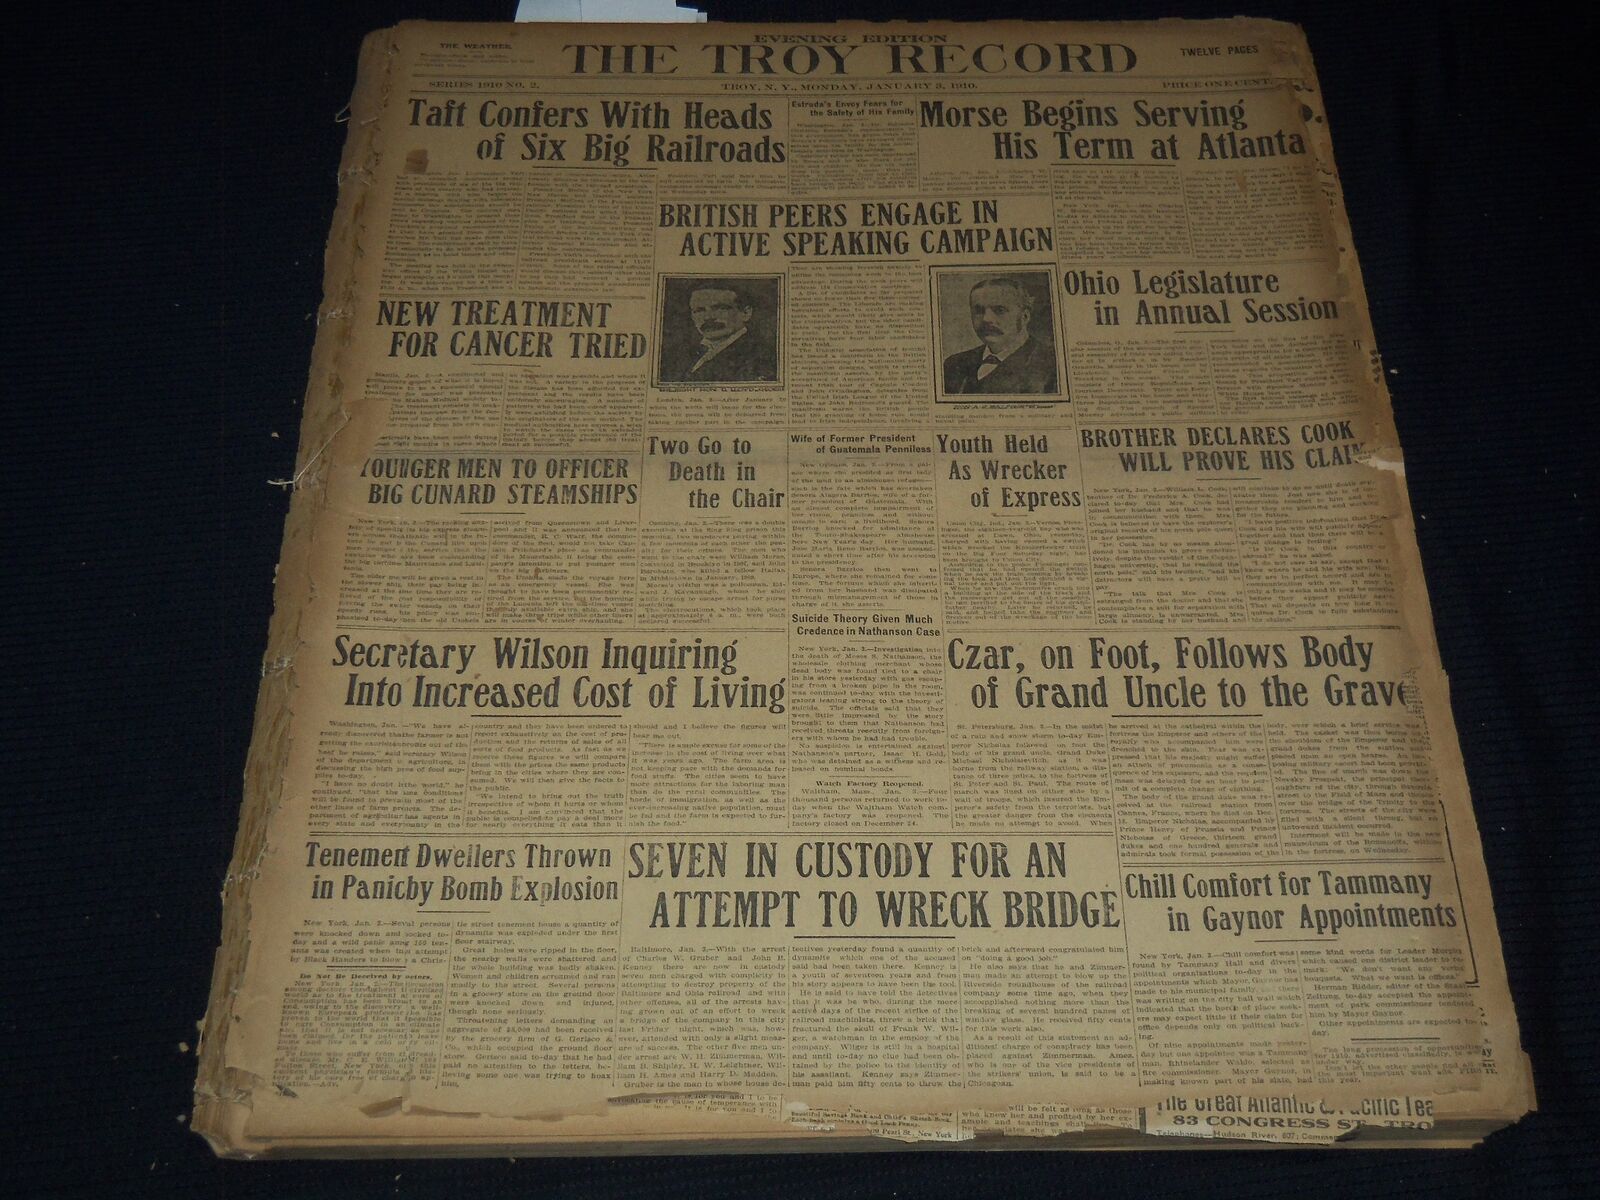 1910 JANUARY 3-31 THE TROY RECORD NEWSPAPER BOUND VOLUME - NEW YORK - NTL 16T